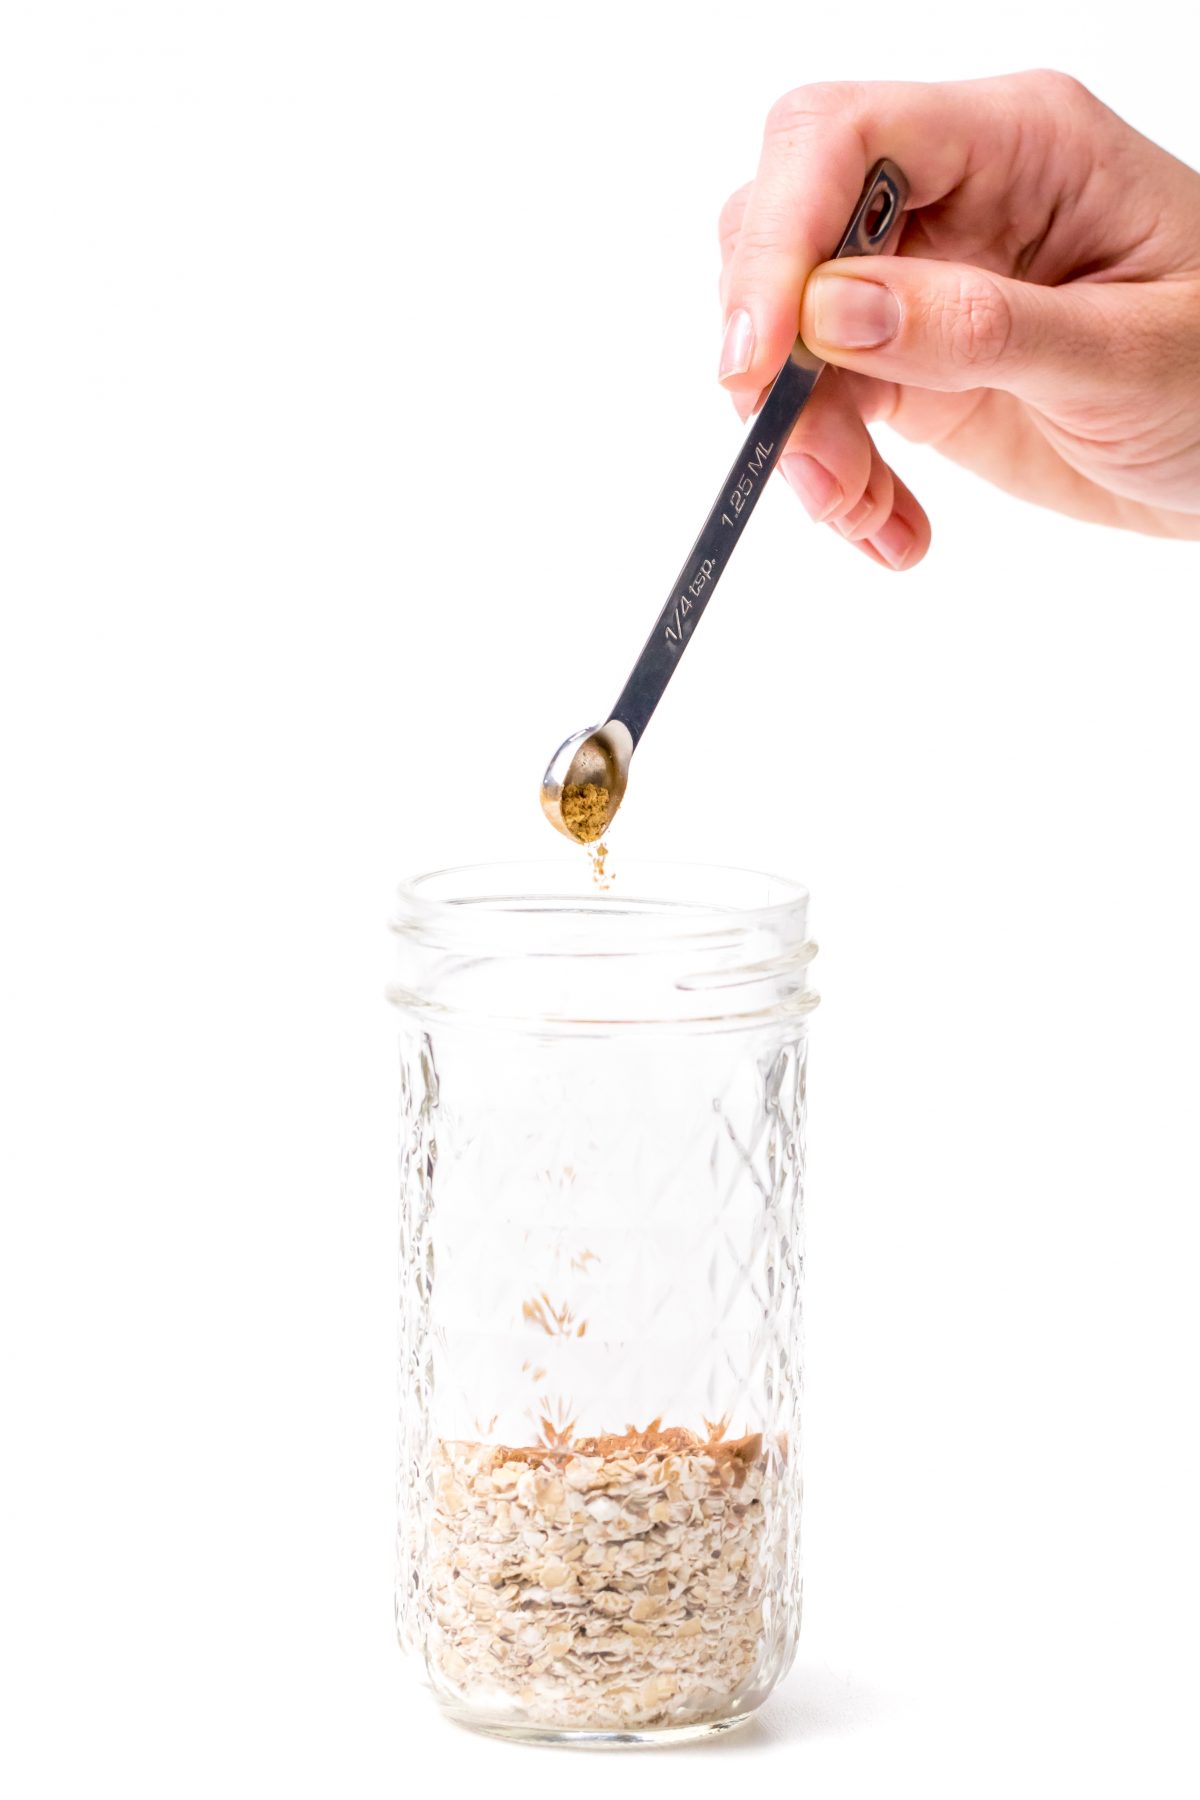 Measure spices into no-sugar-added overnight oats